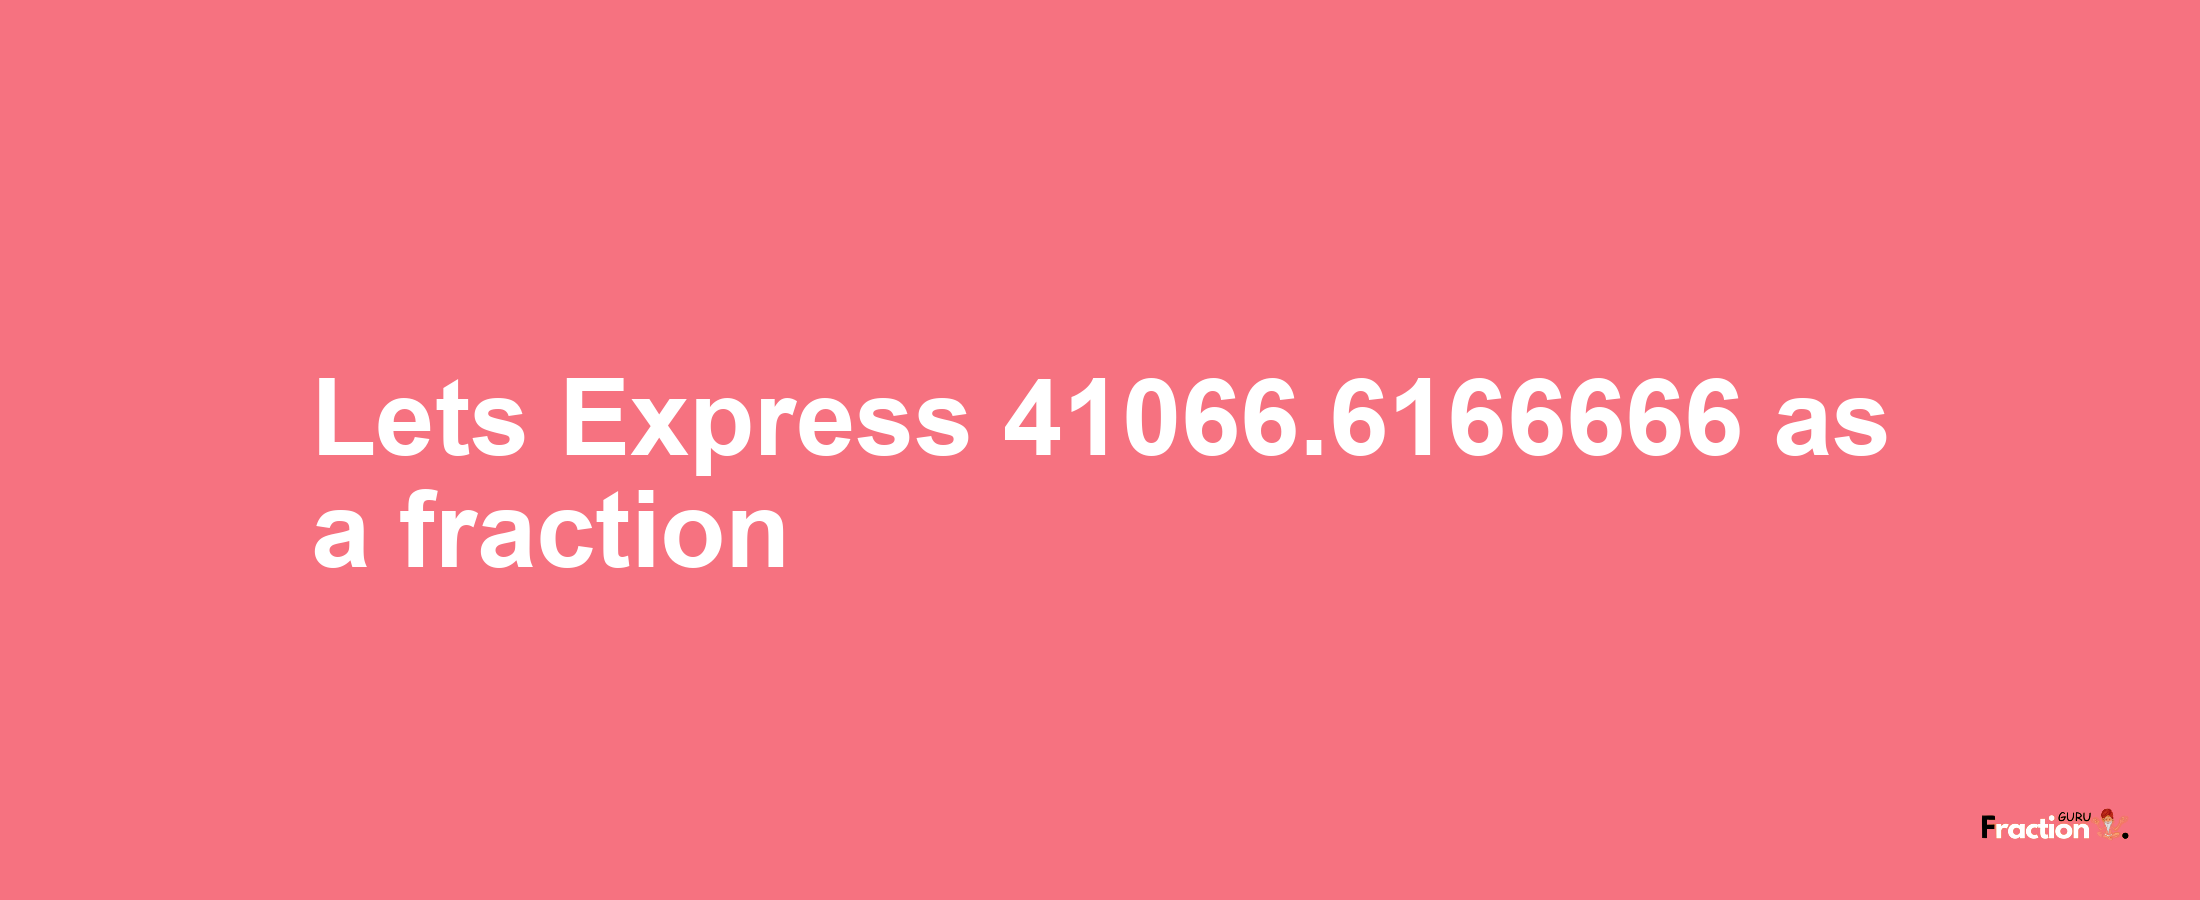 Lets Express 41066.6166666 as afraction